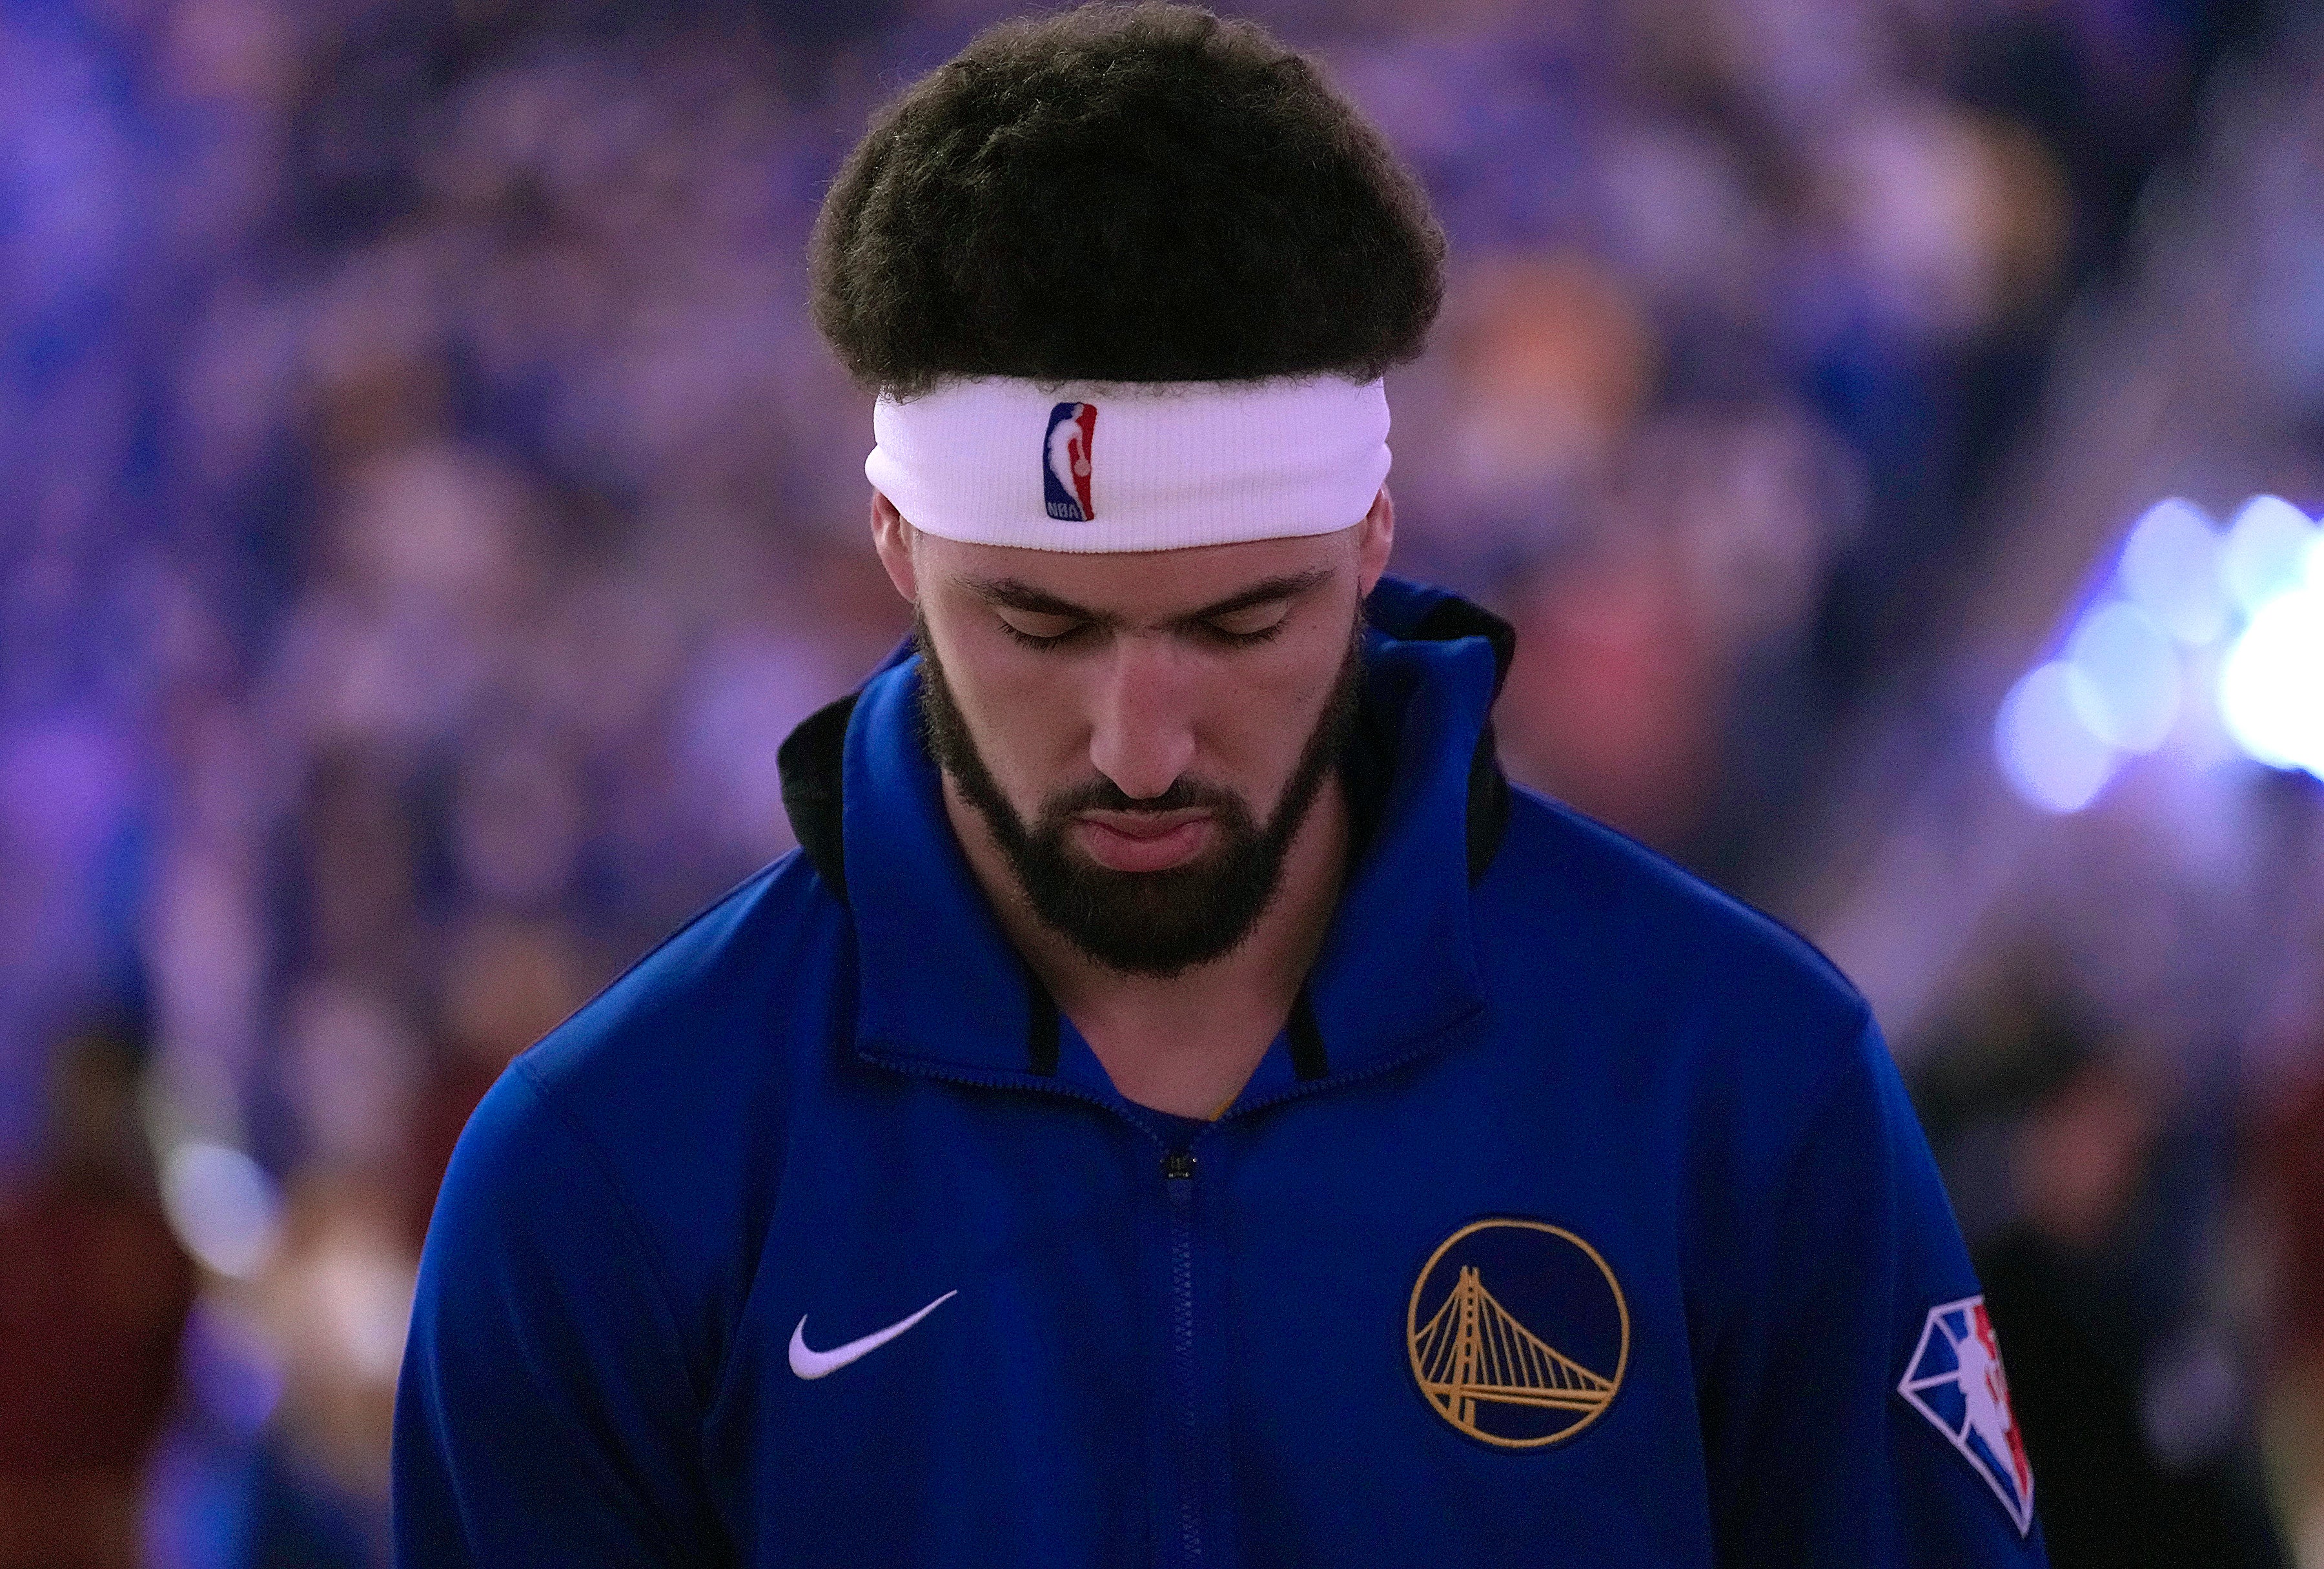 Klay Thompson on his return to the Golden State Warriors against Cleveland Cavaliers